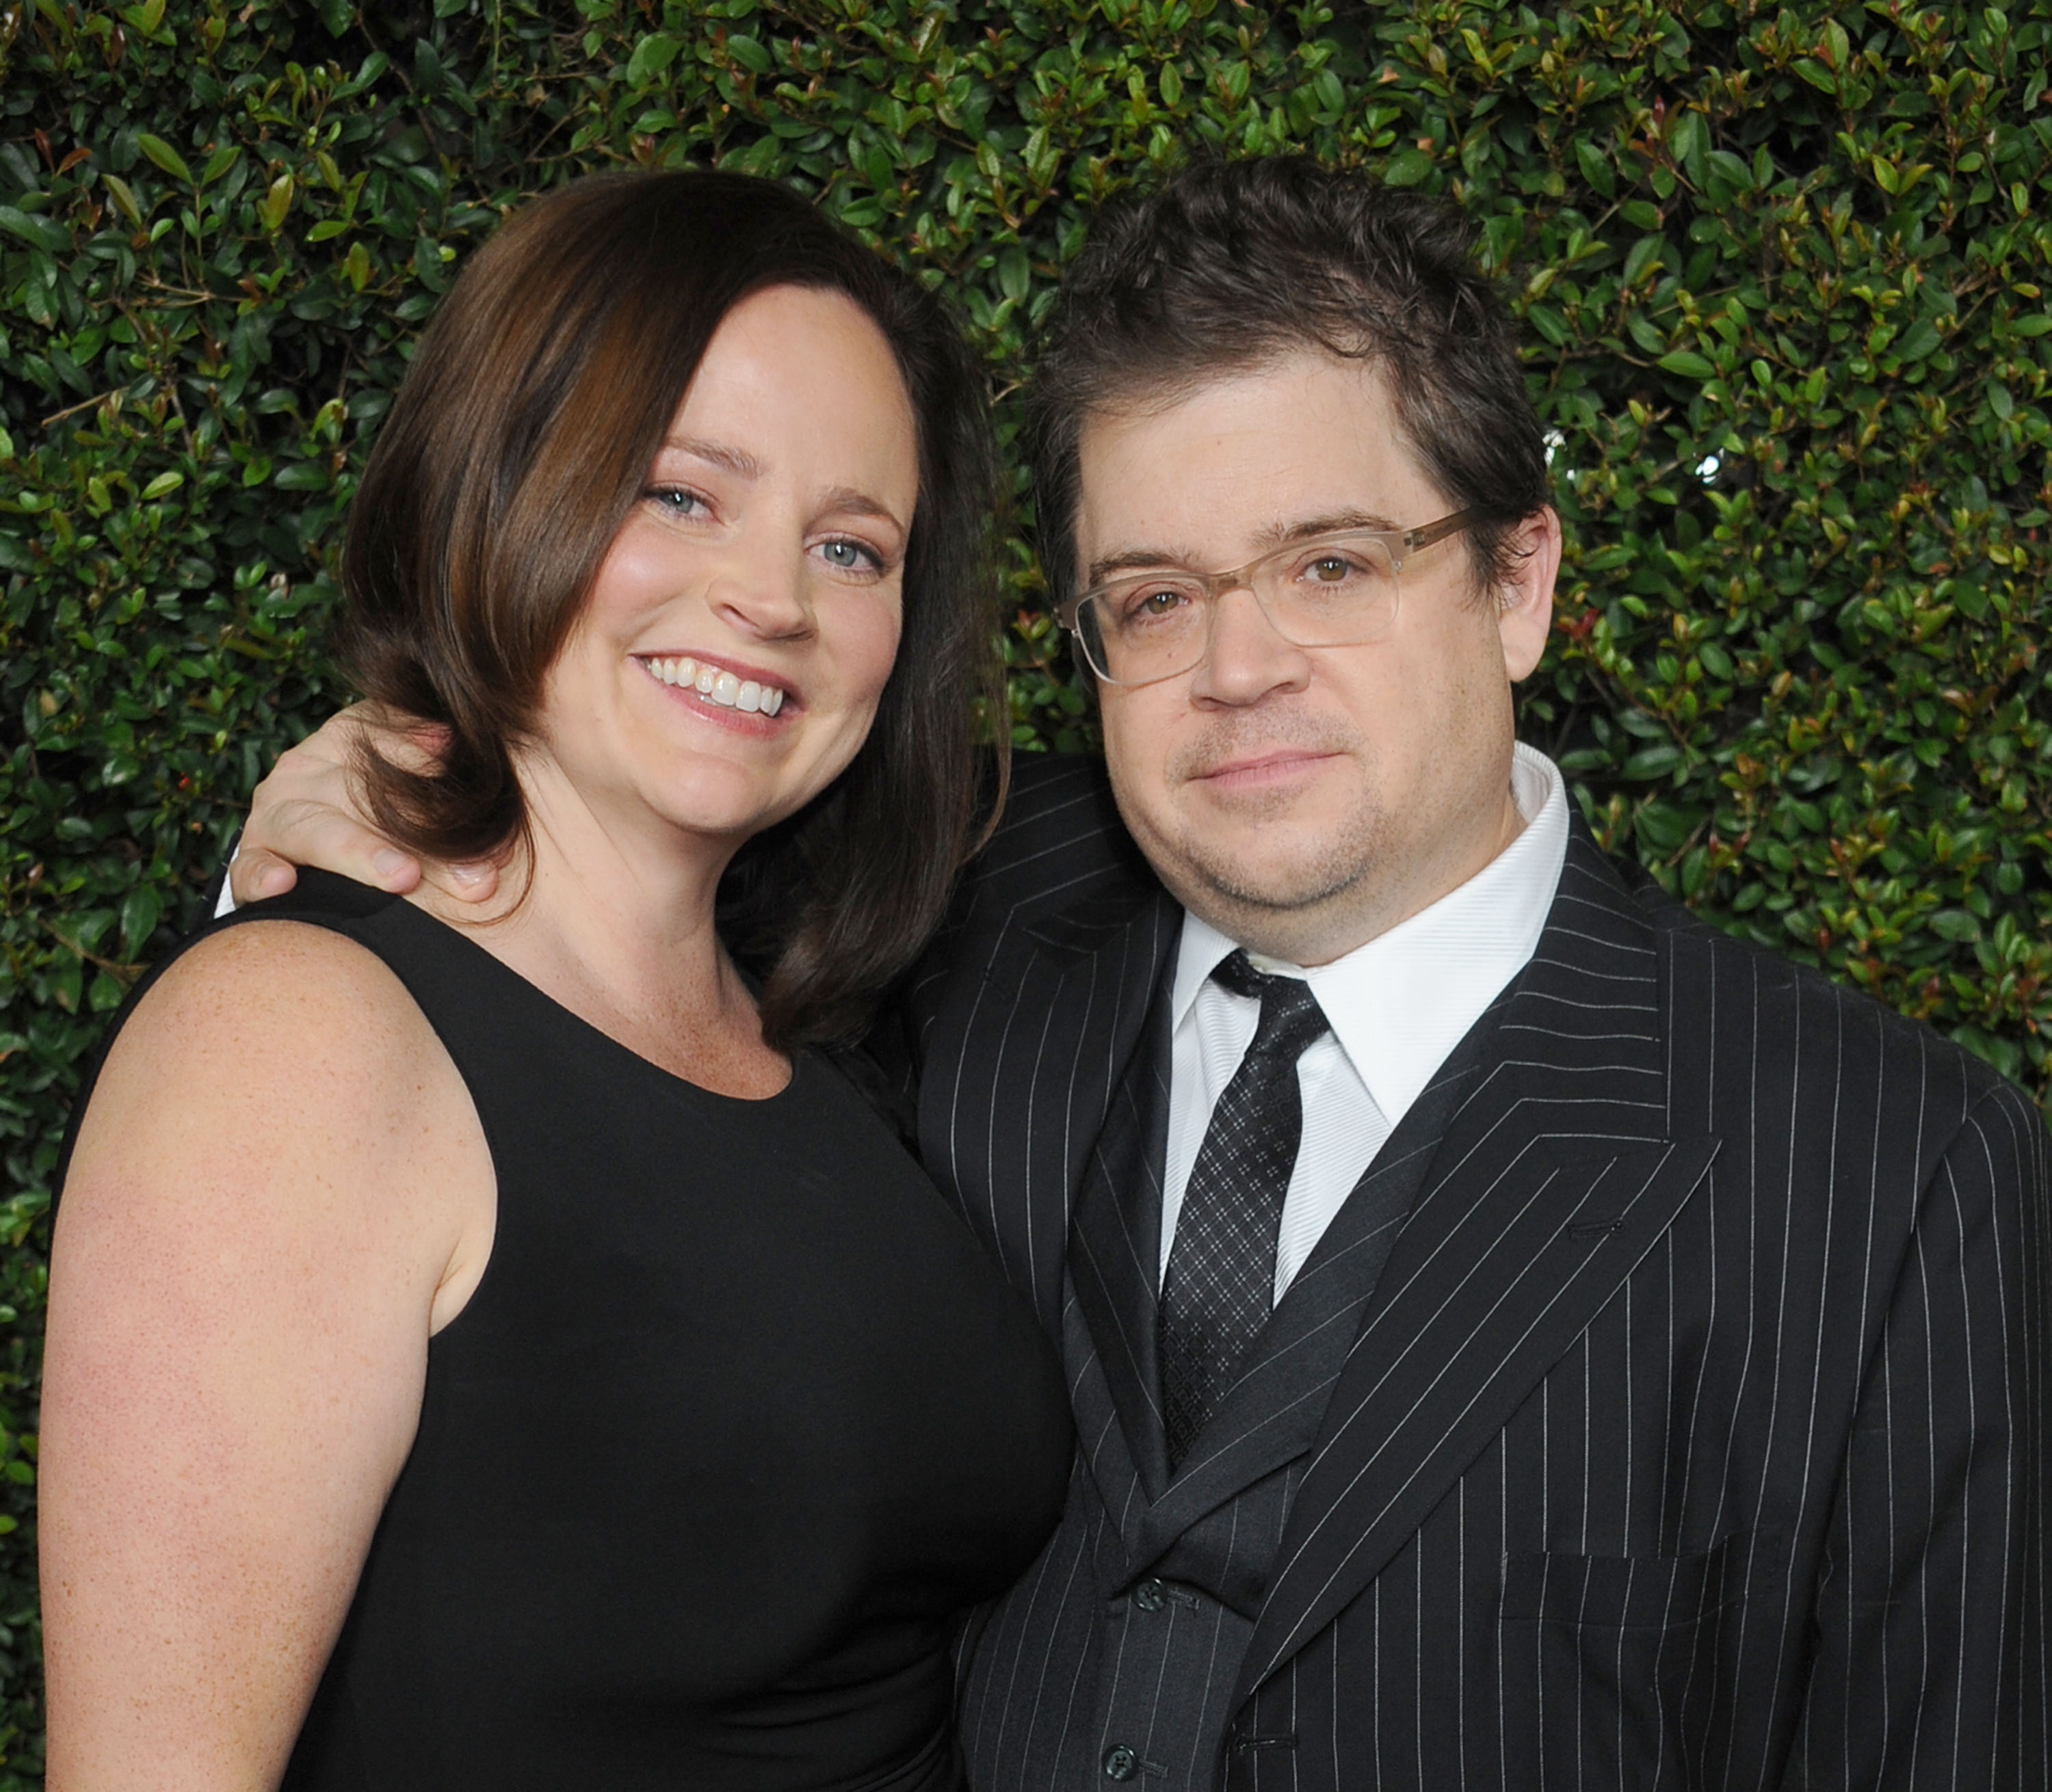 Actor Patton Oswalt and wife Michelle McNamara arrive at the "Young Adult" Los Angeles Premiere at AMPAS Samuel Goldwyn Theater on December 15, 2011 in Beverly Hills, California. (Gregg DeGuire - FilmMagic/Getty Images)